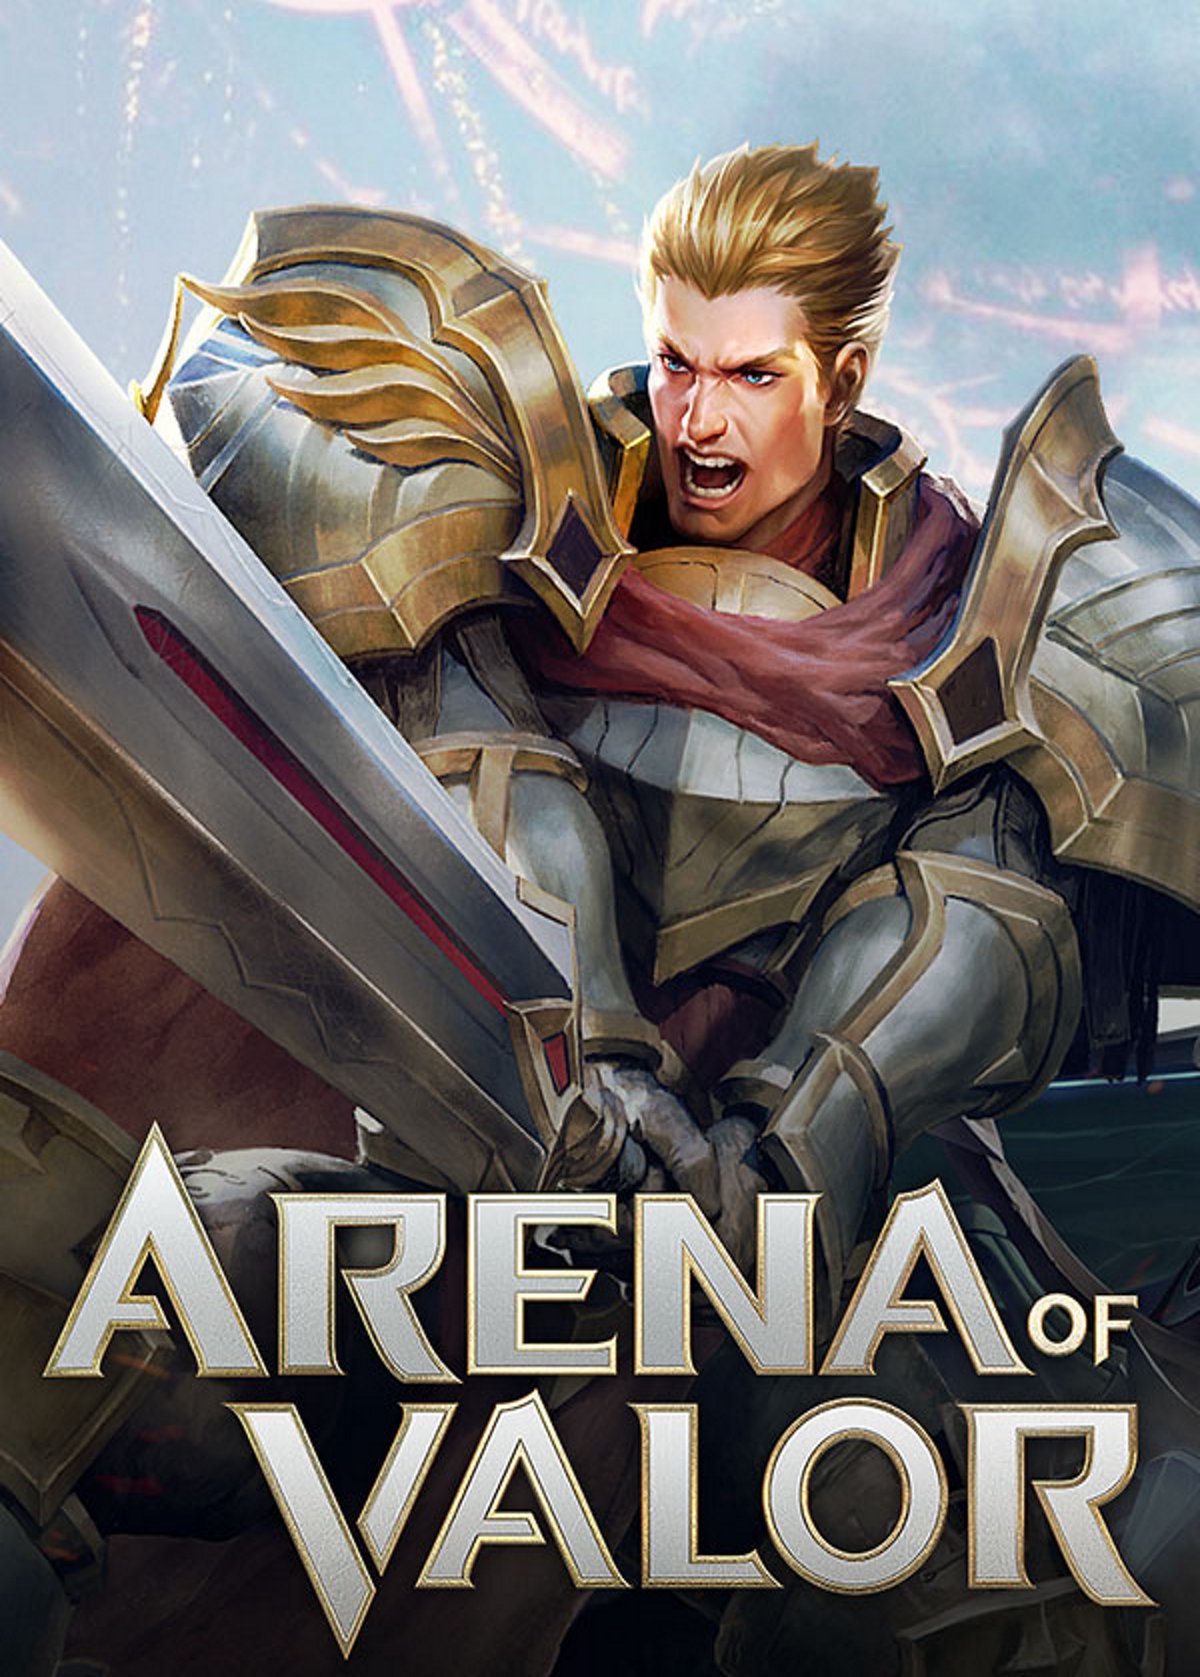 Want to play Arena of Valor? Discover 7 easy tips for beginners!